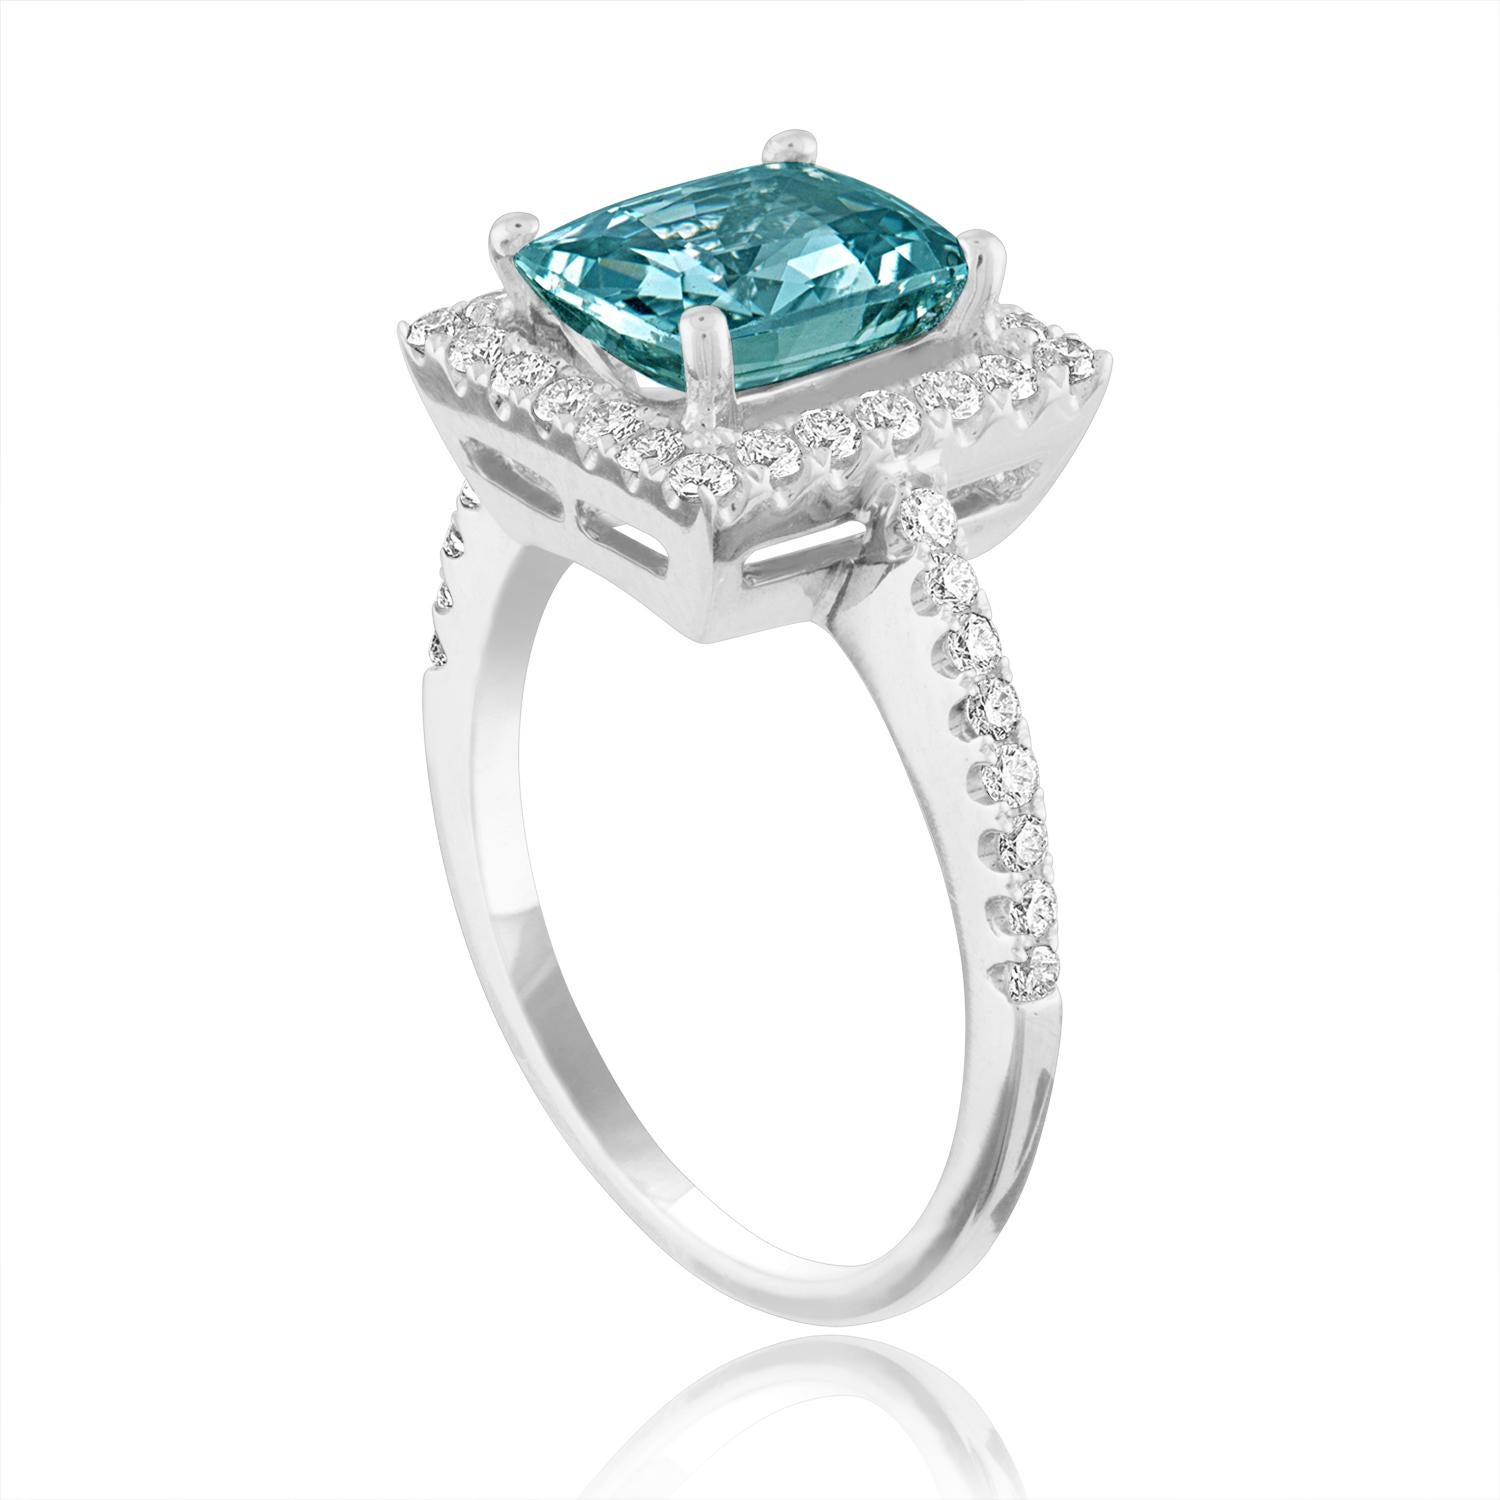 Beautiful Cushion Cut Halo Ring
The ring is 18K White Gold
The Center Stone is a Cushion Cut Grayish Green-Blue Sapphire 2.52 Carats
The Sapphire is AGL Certified Heated
There are 0.45 Carats in Diamonds F/G VS/SI
The ring is a size 6.50,